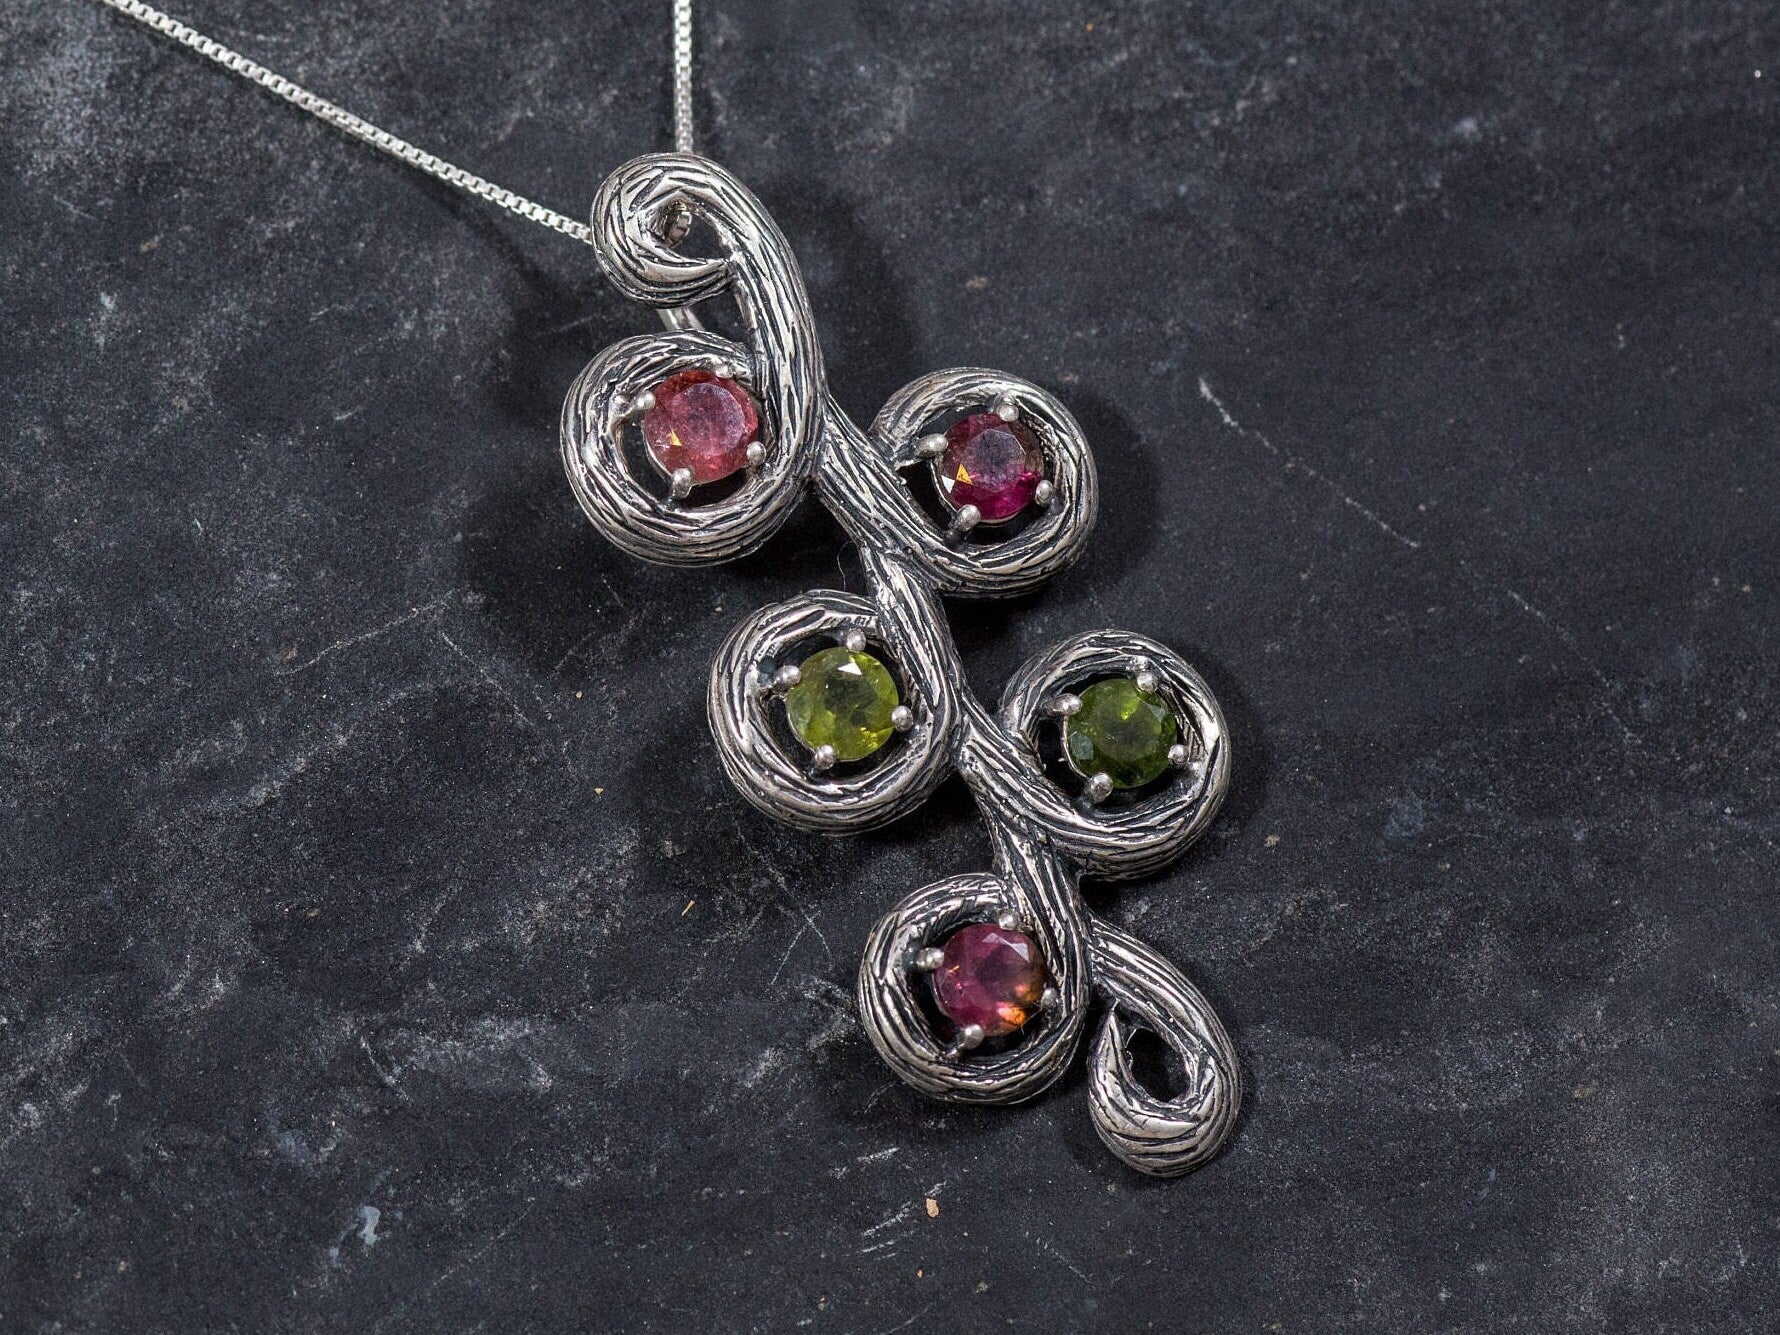 Long Leaf Pendant, Natural Tourmaline, Tourmaline Necklace, Branch Pendant, Pink and Green Tourmaline, October Birthstone, Solid Silver